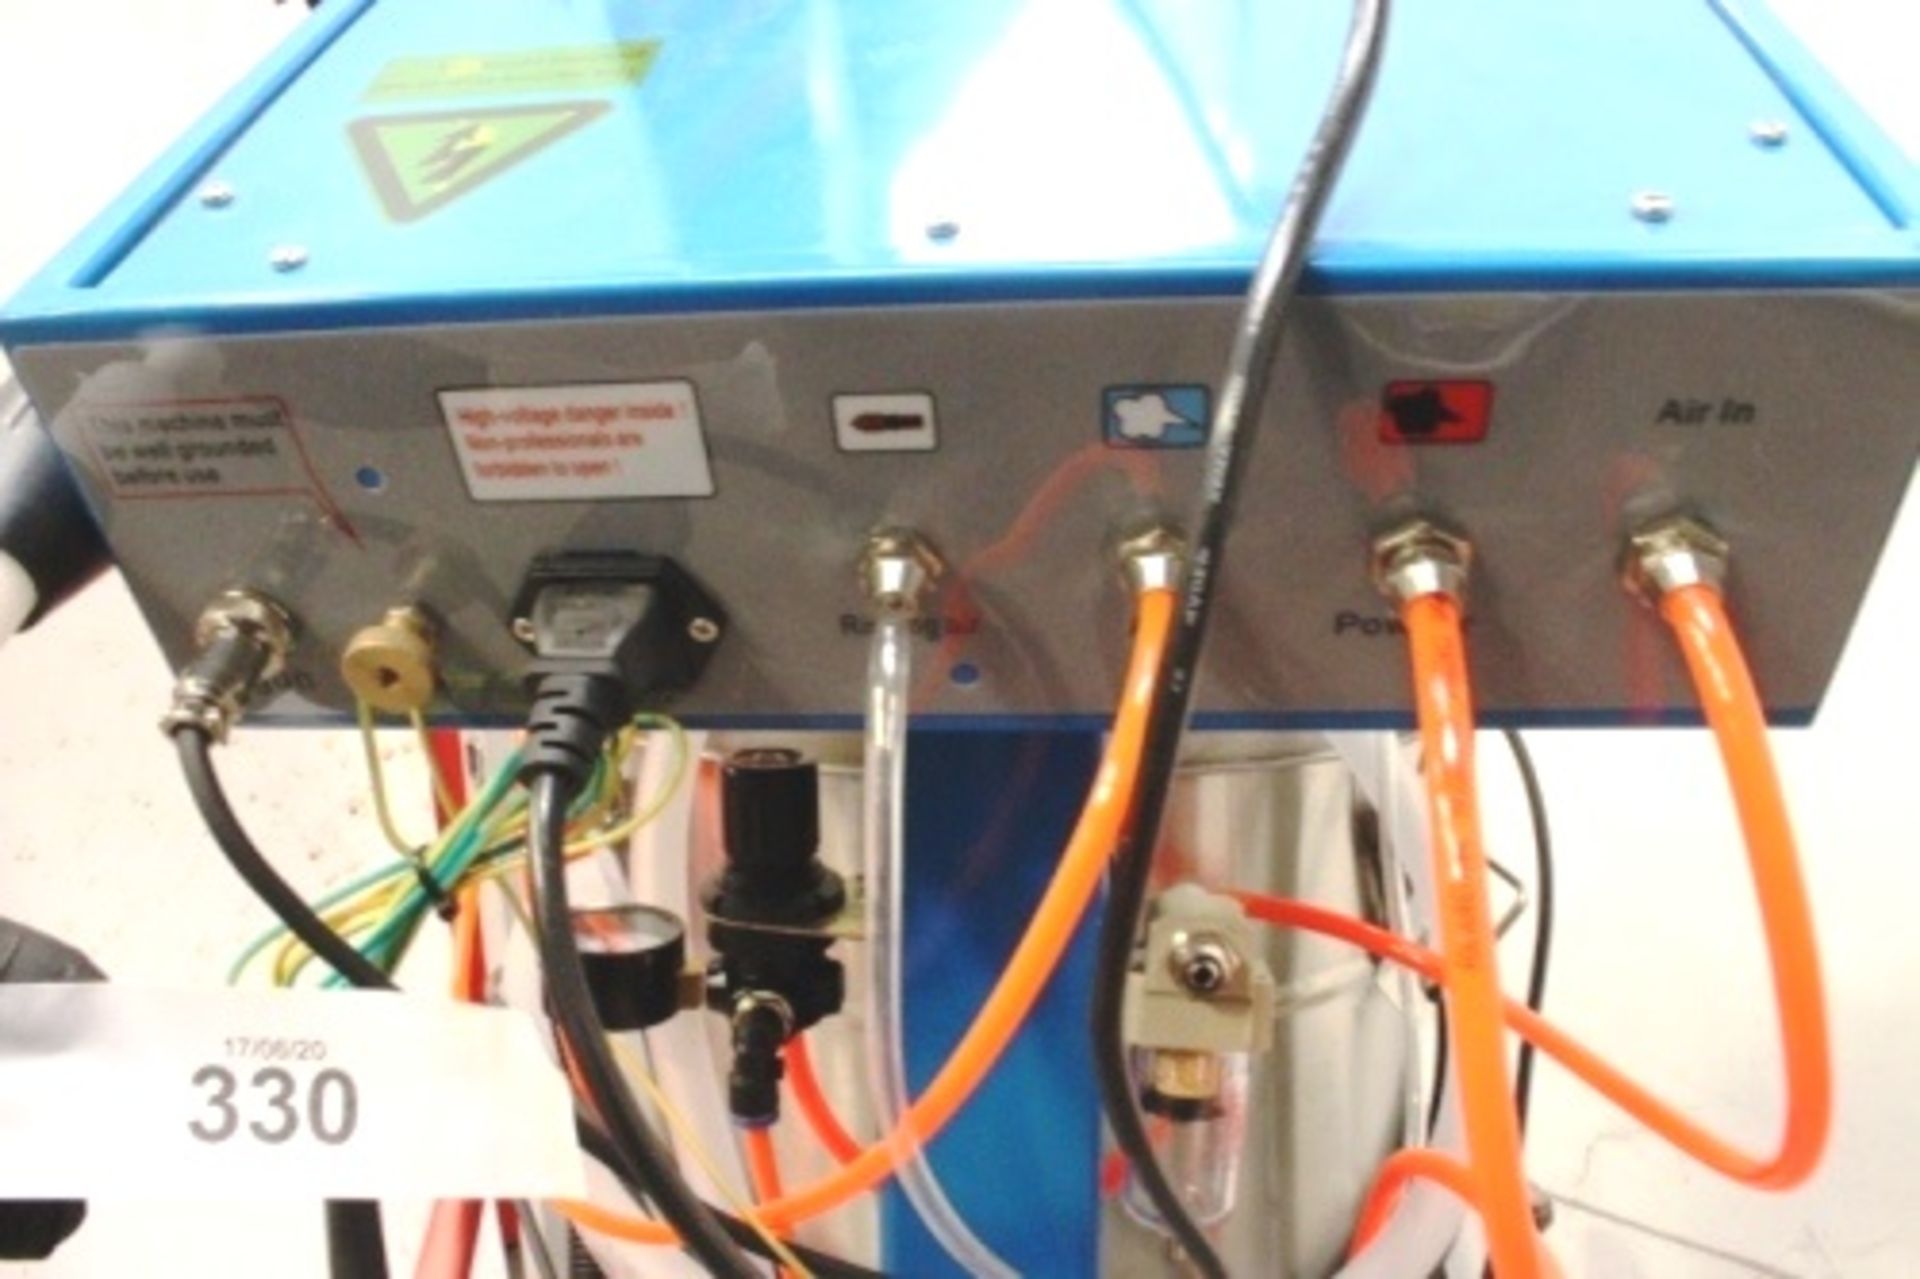 A mobile powder coating machine - New, checked complete, does not power on, untested (staff room - Image 3 of 7